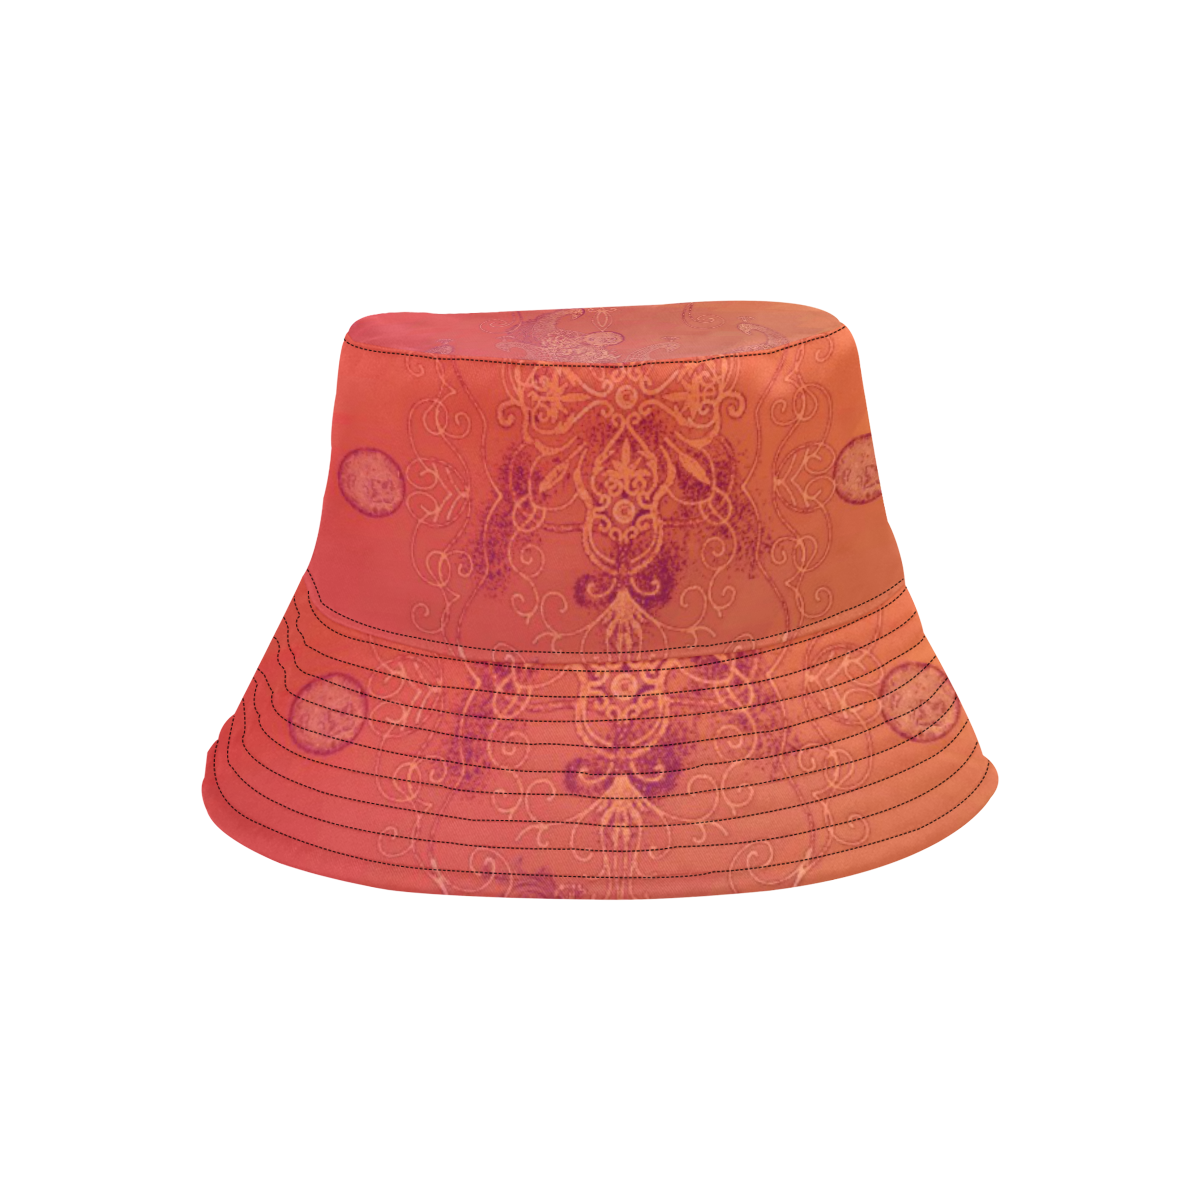 peacocq parade 20 All Over Print Bucket Hat for Men